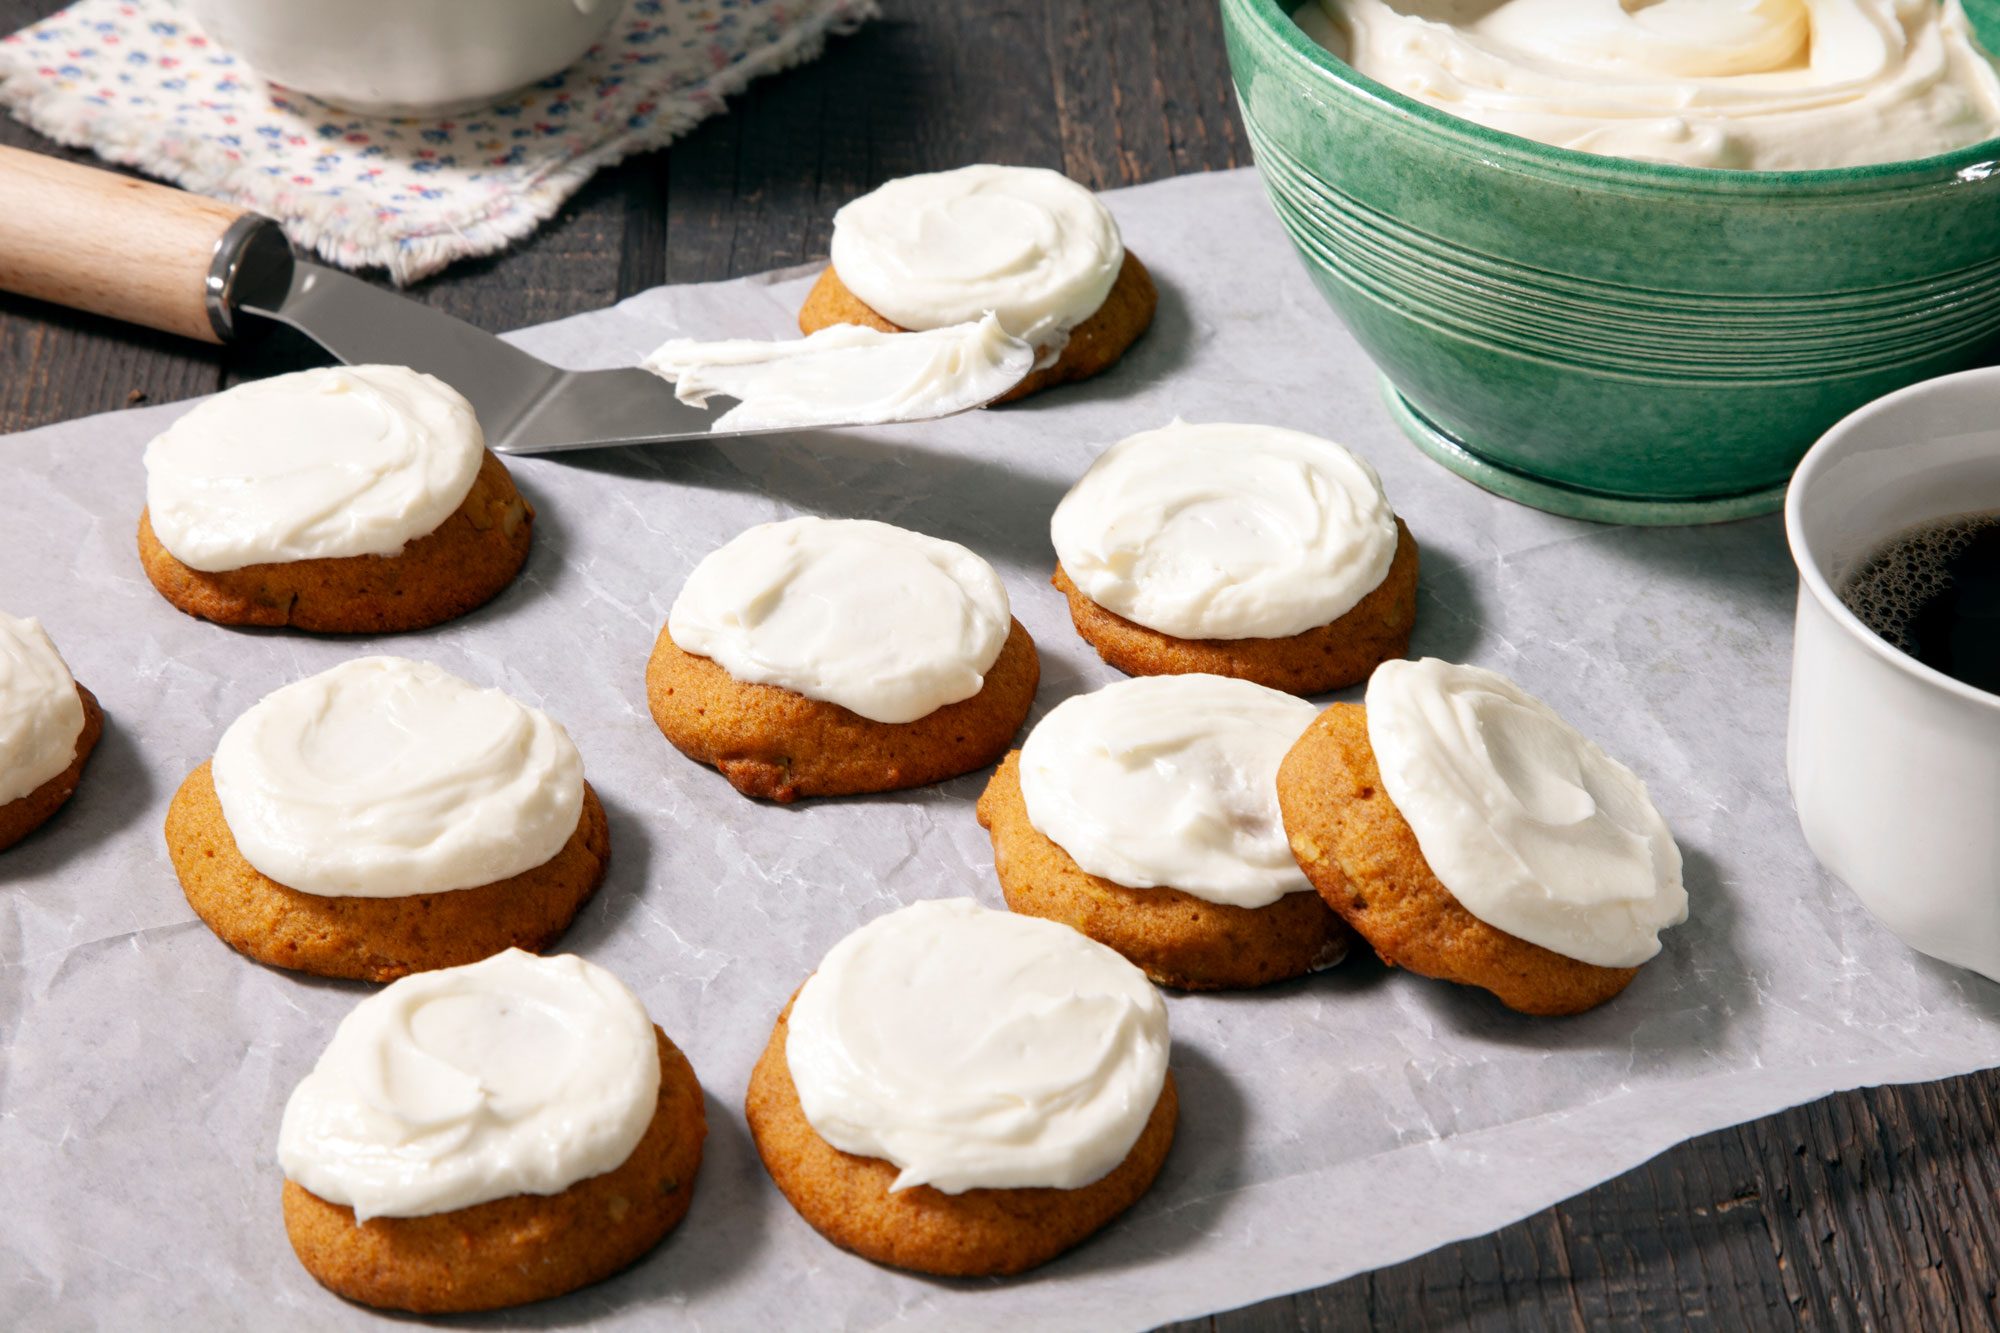 Pumpkin Cookies With Cream Cheese Frosting on baking paper on wooden surface